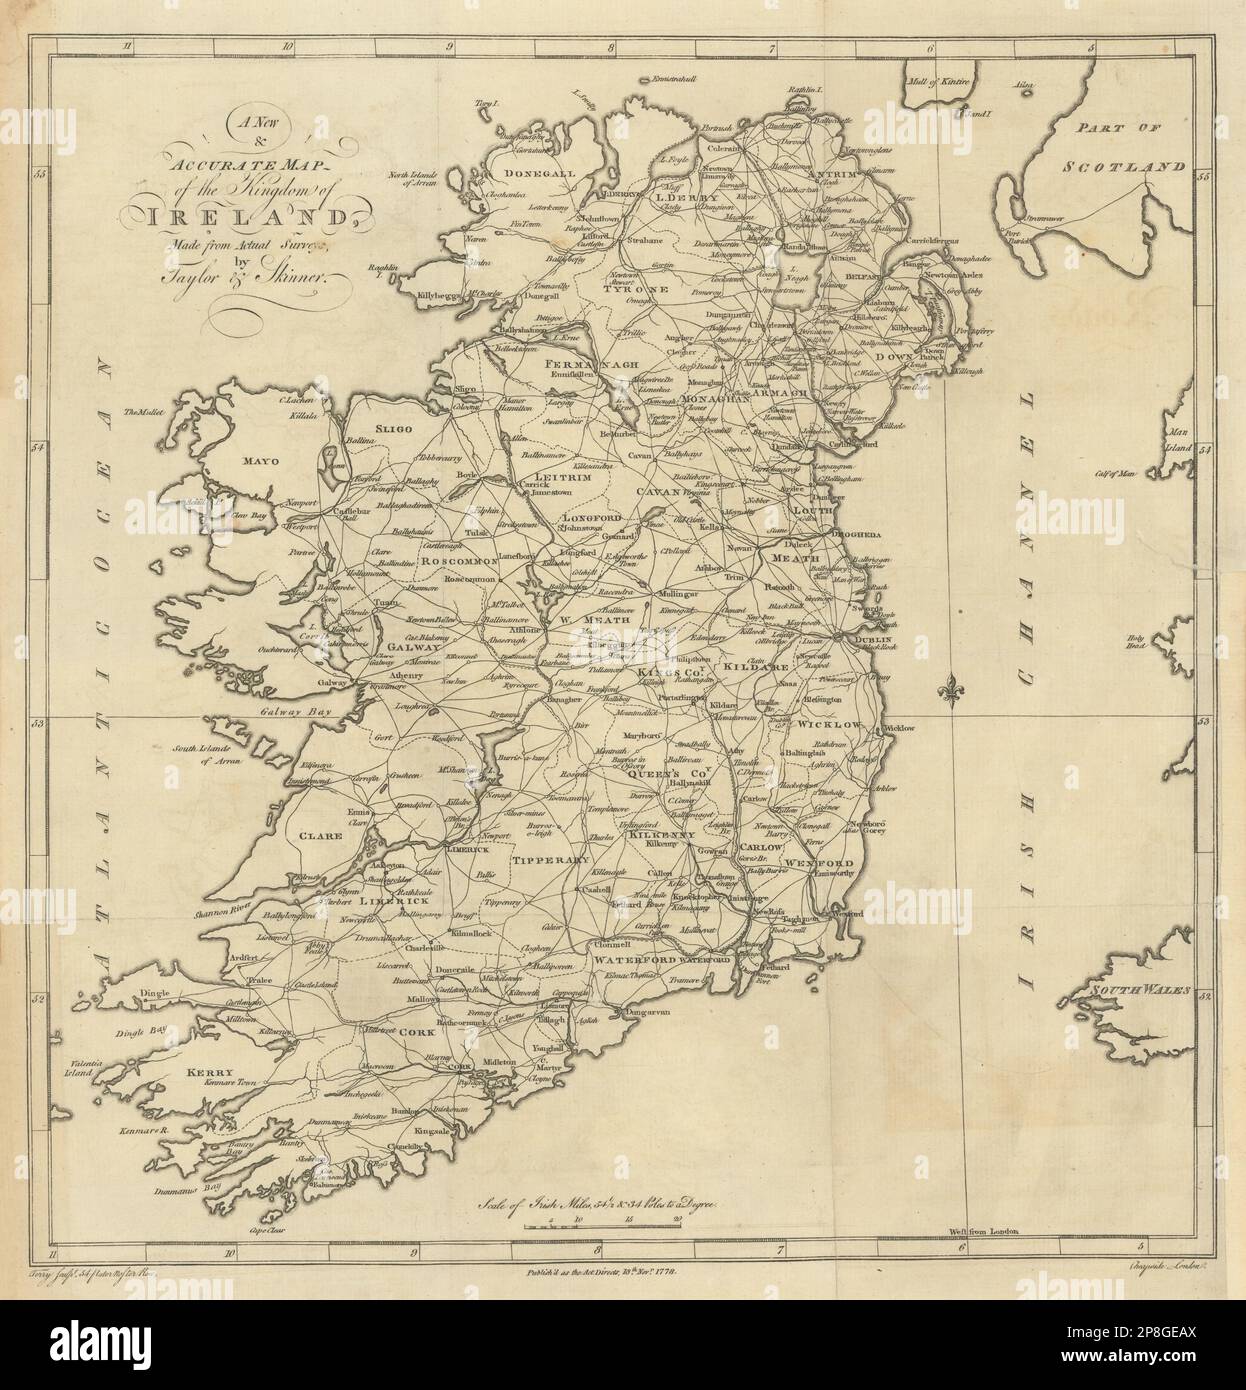 A New & Accurate Map of the Kingdom of Ireland, by Taylor & Skinner 1778 Stock Photo